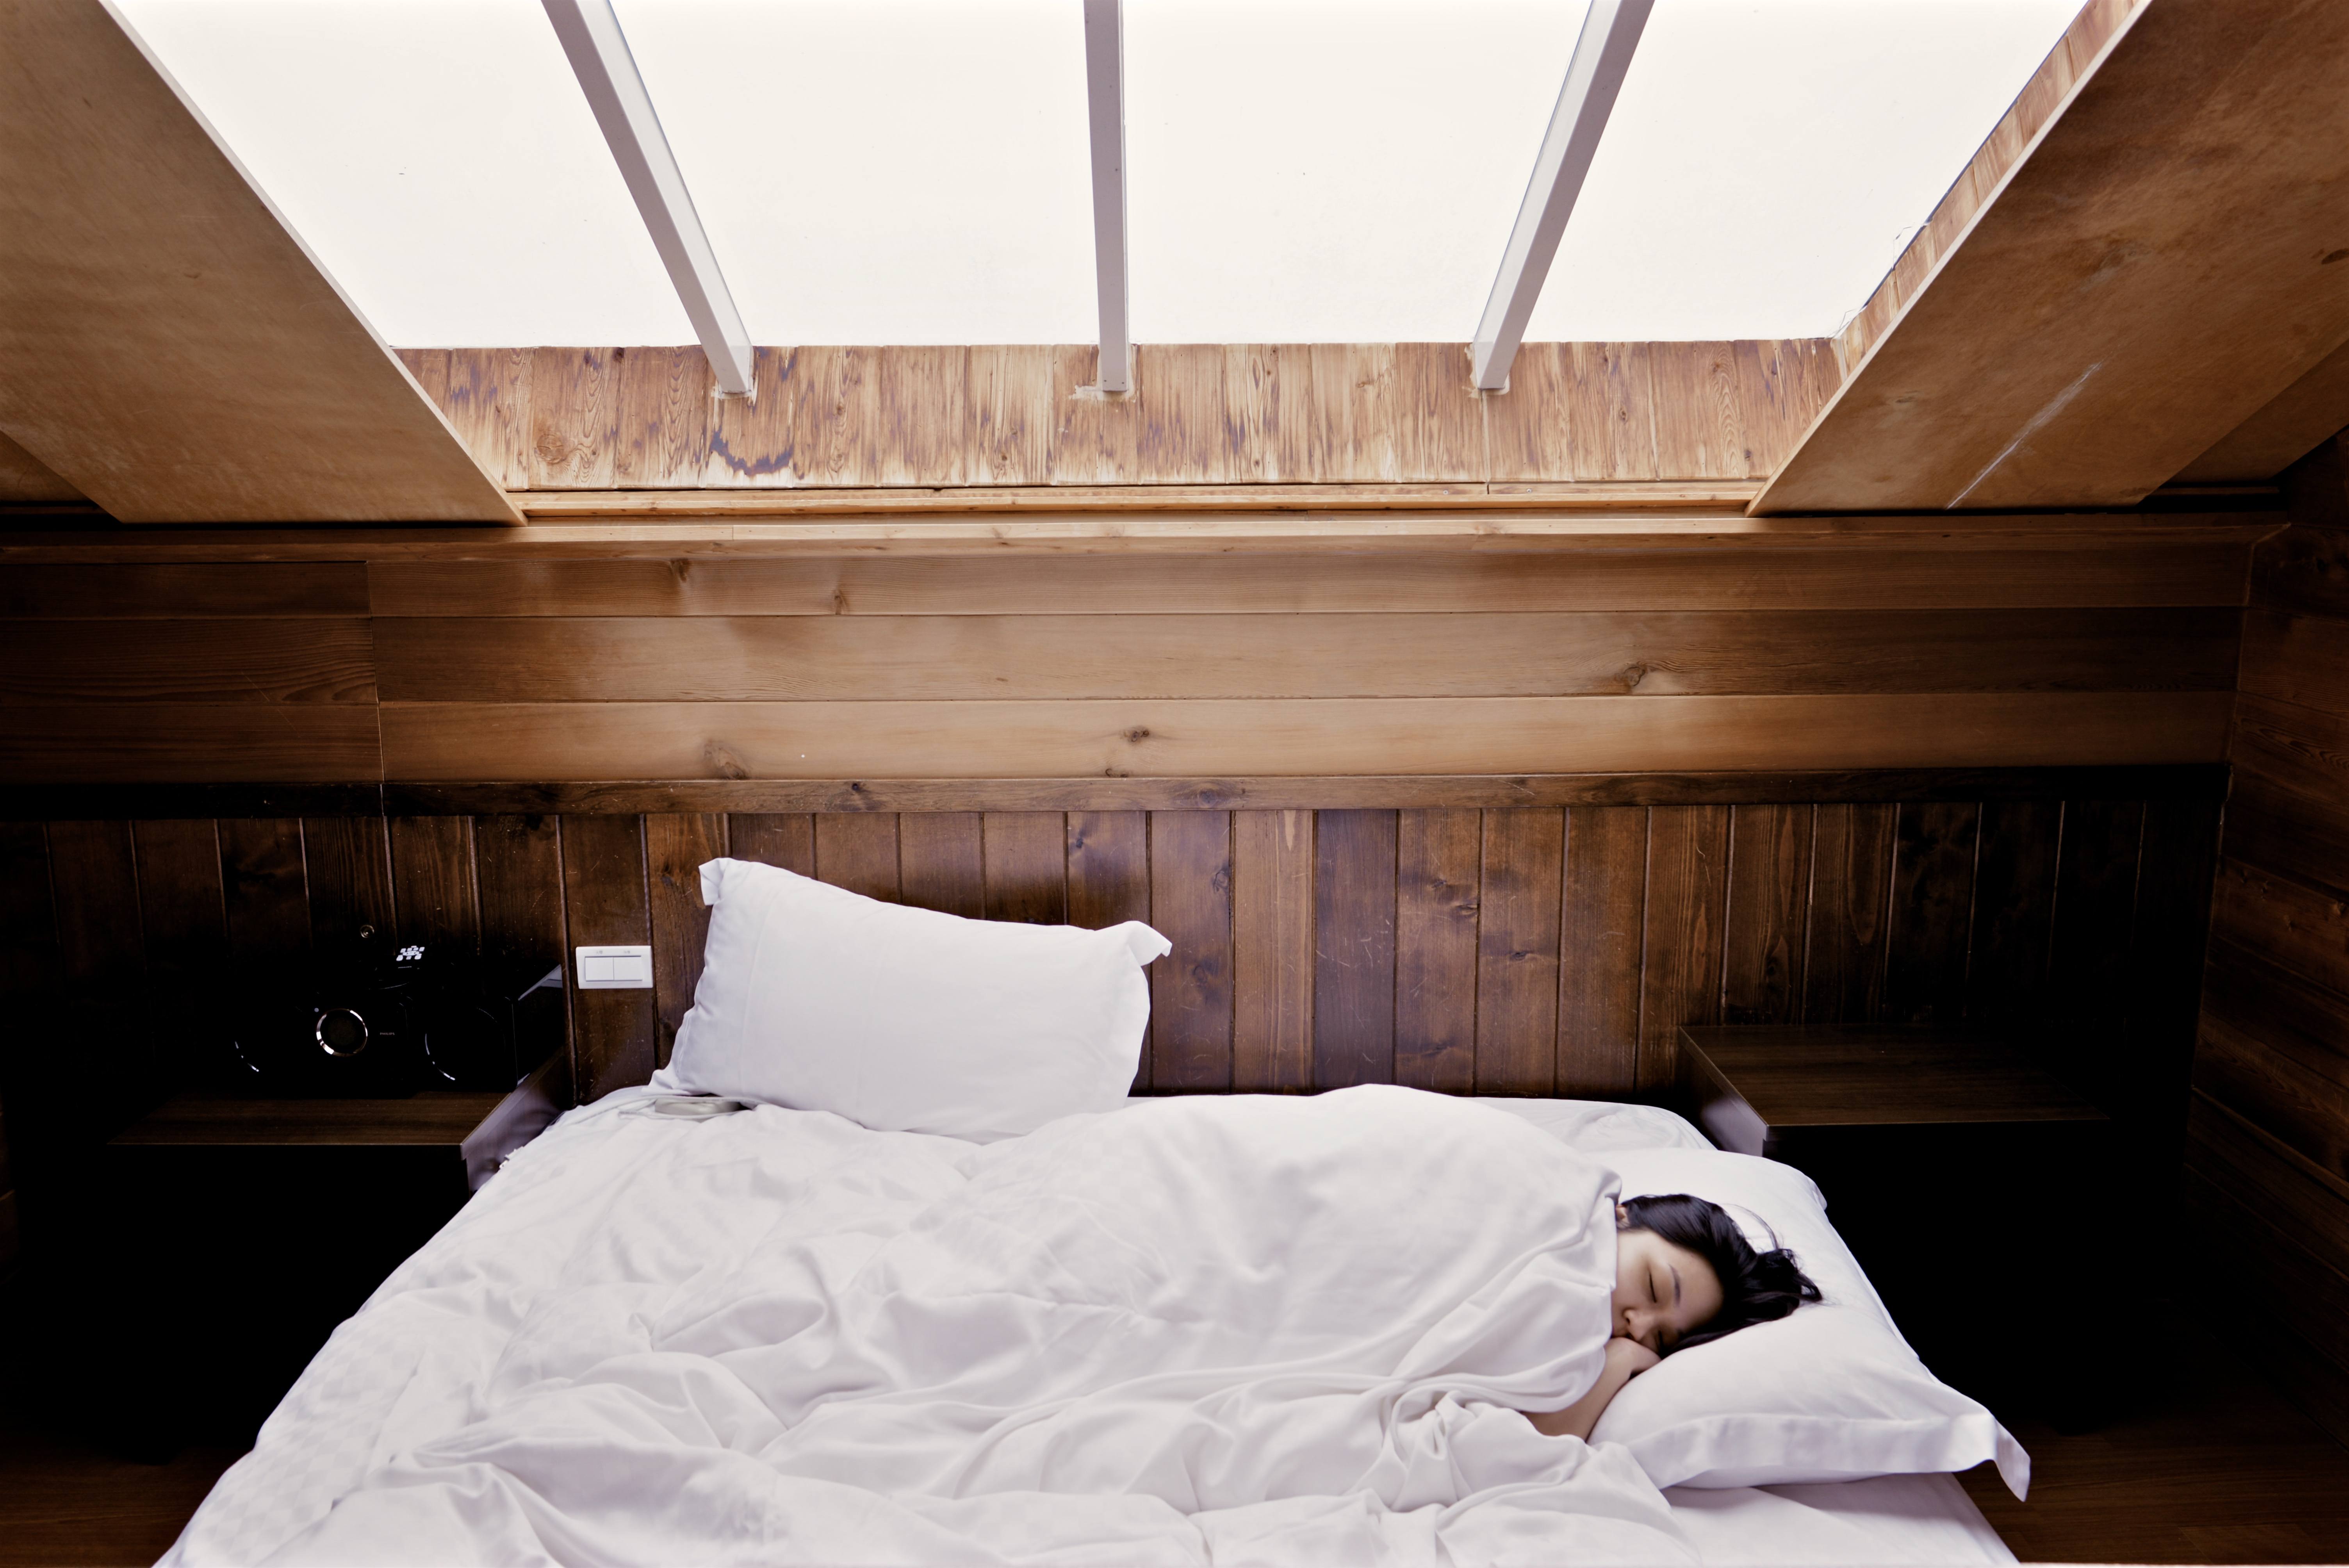 A Colder Room Can Decrease Insomnia, Study Finds